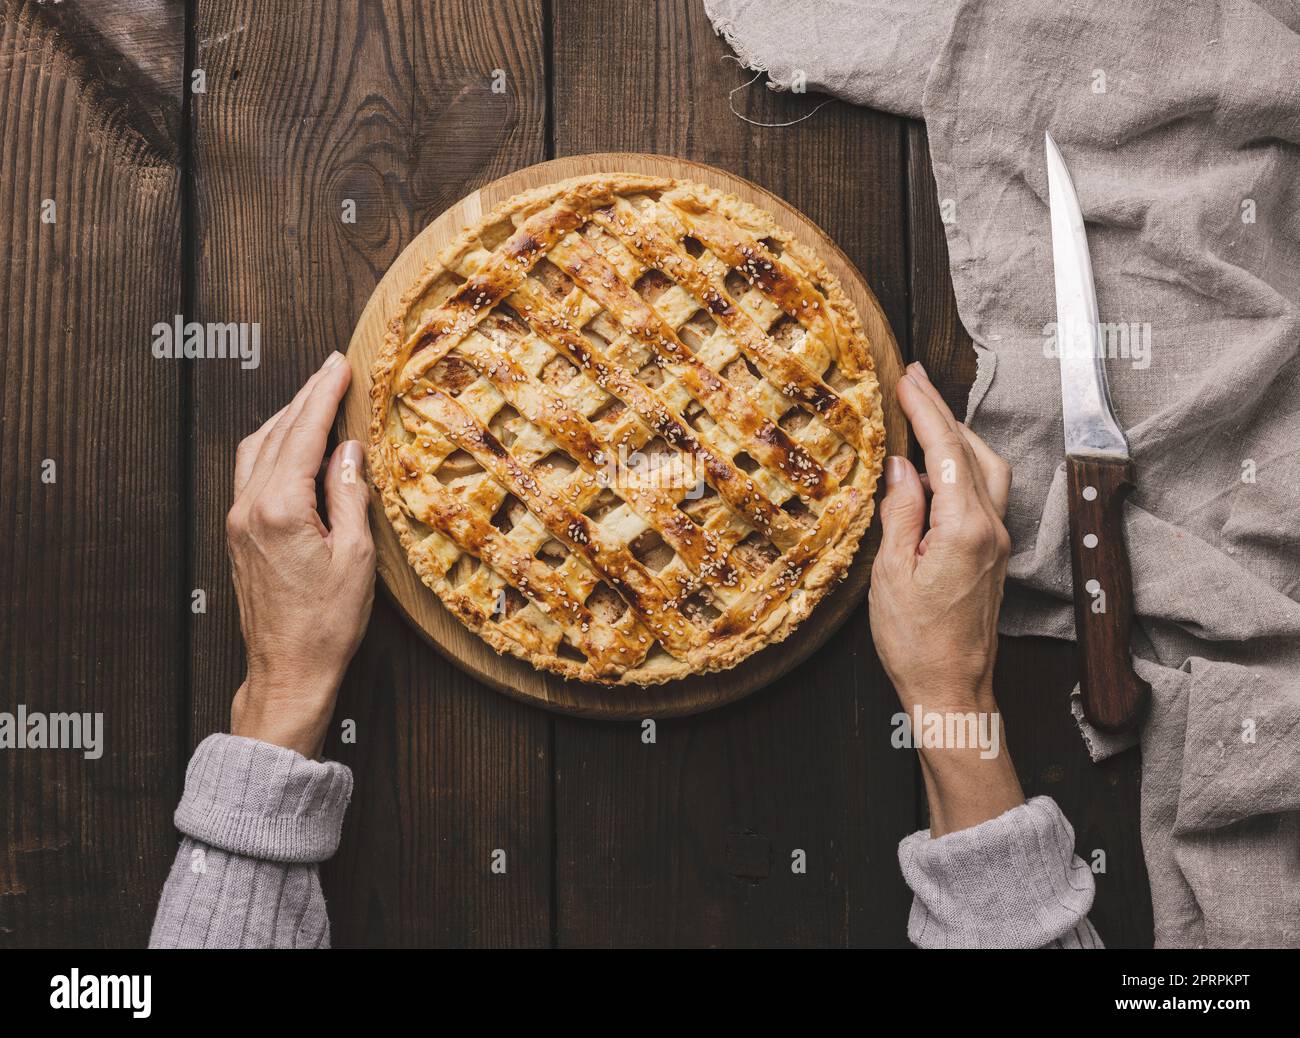 Two female hands hold a round baked pie with apple filling on a wooden board, brown table. Stock Photo